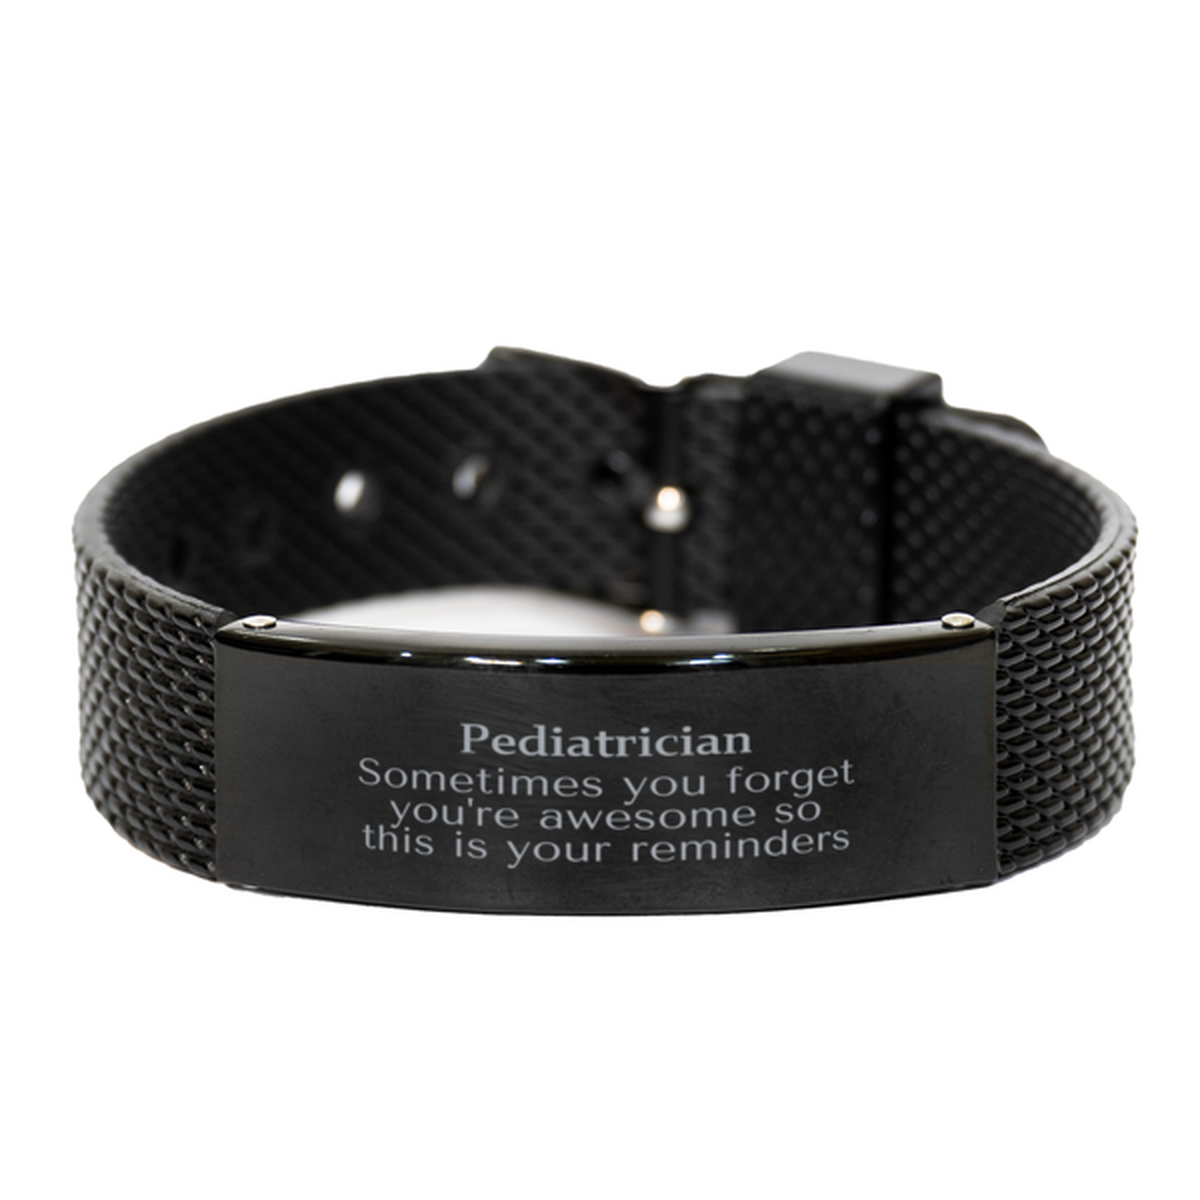 Sentimental Pediatrician Black Shark Mesh Bracelet, Pediatrician Sometimes you forget you're awesome so this is your reminders, Graduation Christmas Birthday Gifts for Pediatrician, Men, Women, Coworkers